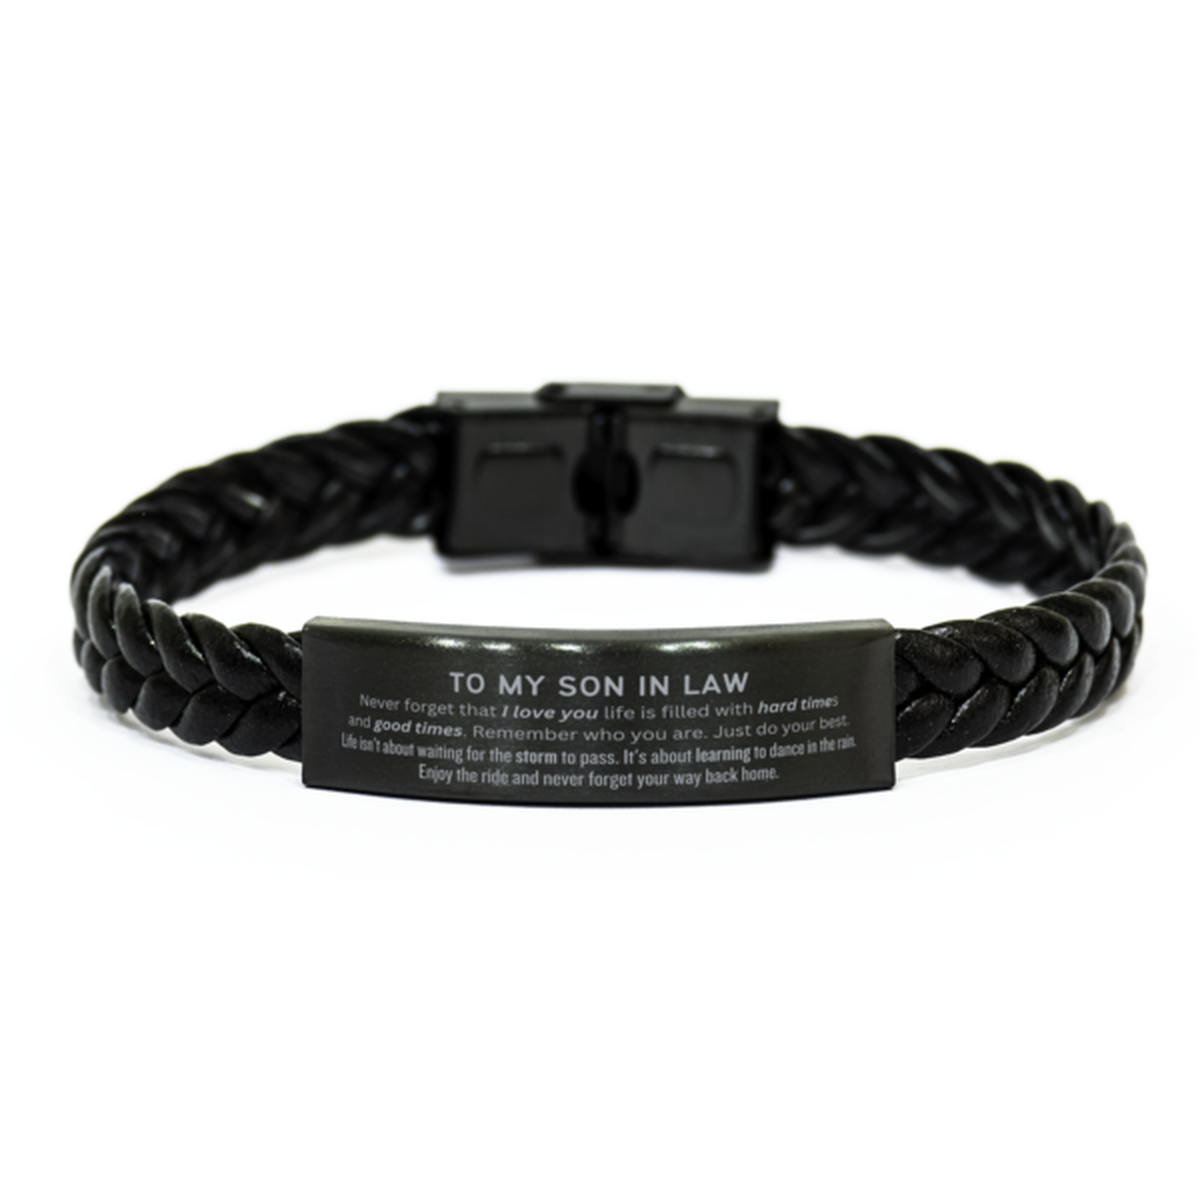 Christmas Son In Law Braided Leather Bracelet Gifts, To My Son In Law Birthday Thank You Gifts For Son In Law, Graduation Unique Gifts For Son In Law To My Son In Law Never forget that I love you life is filled with hard times and good times. Remember who